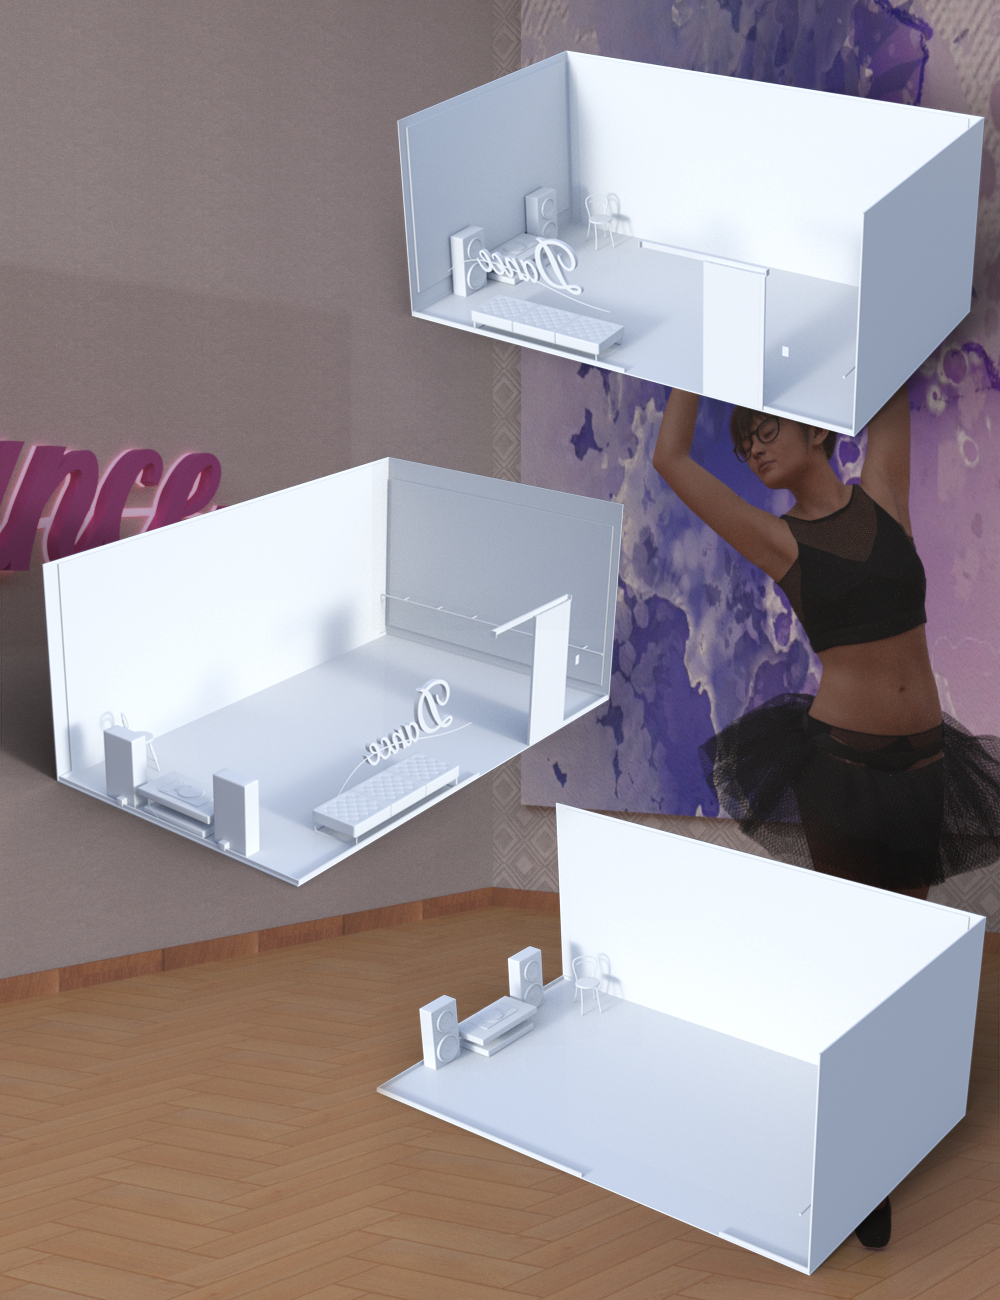 Dance Room Studio, Props, and Poses for Genesis 3 and 8 Females by: Muscleman, 3D Models by Daz 3D